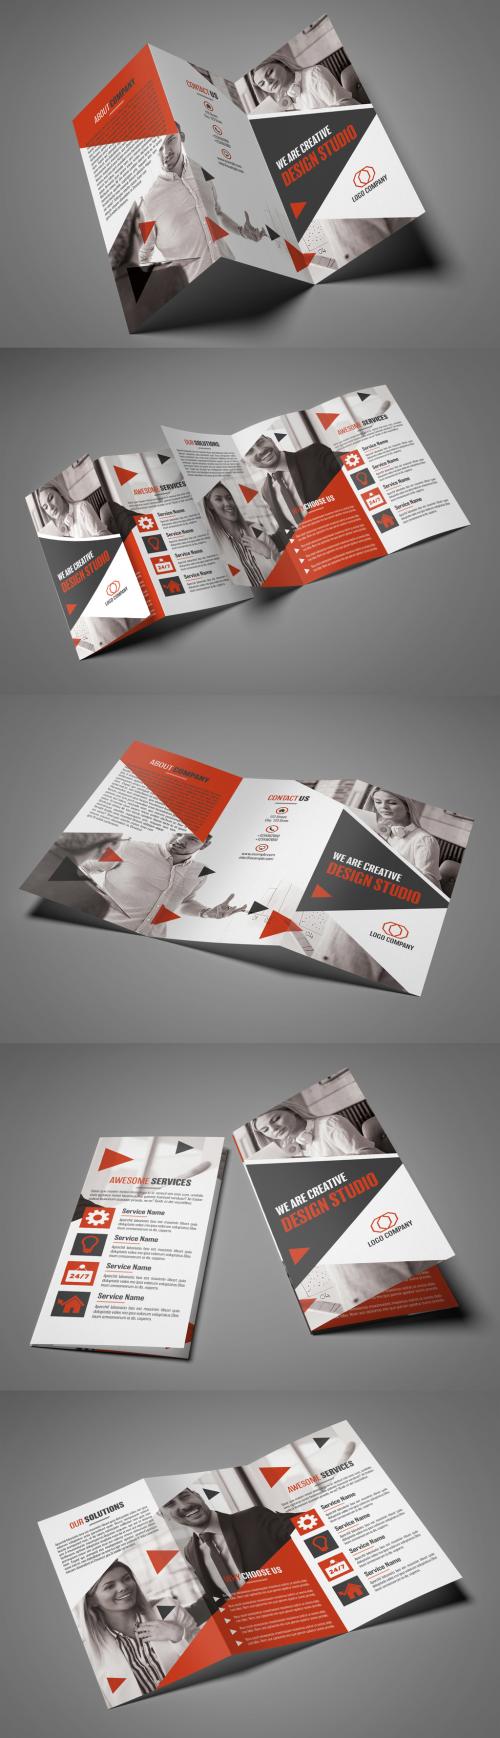 Adobe Stock - Trifold Brochure Layout with Triangular Elements 1 - 195221224